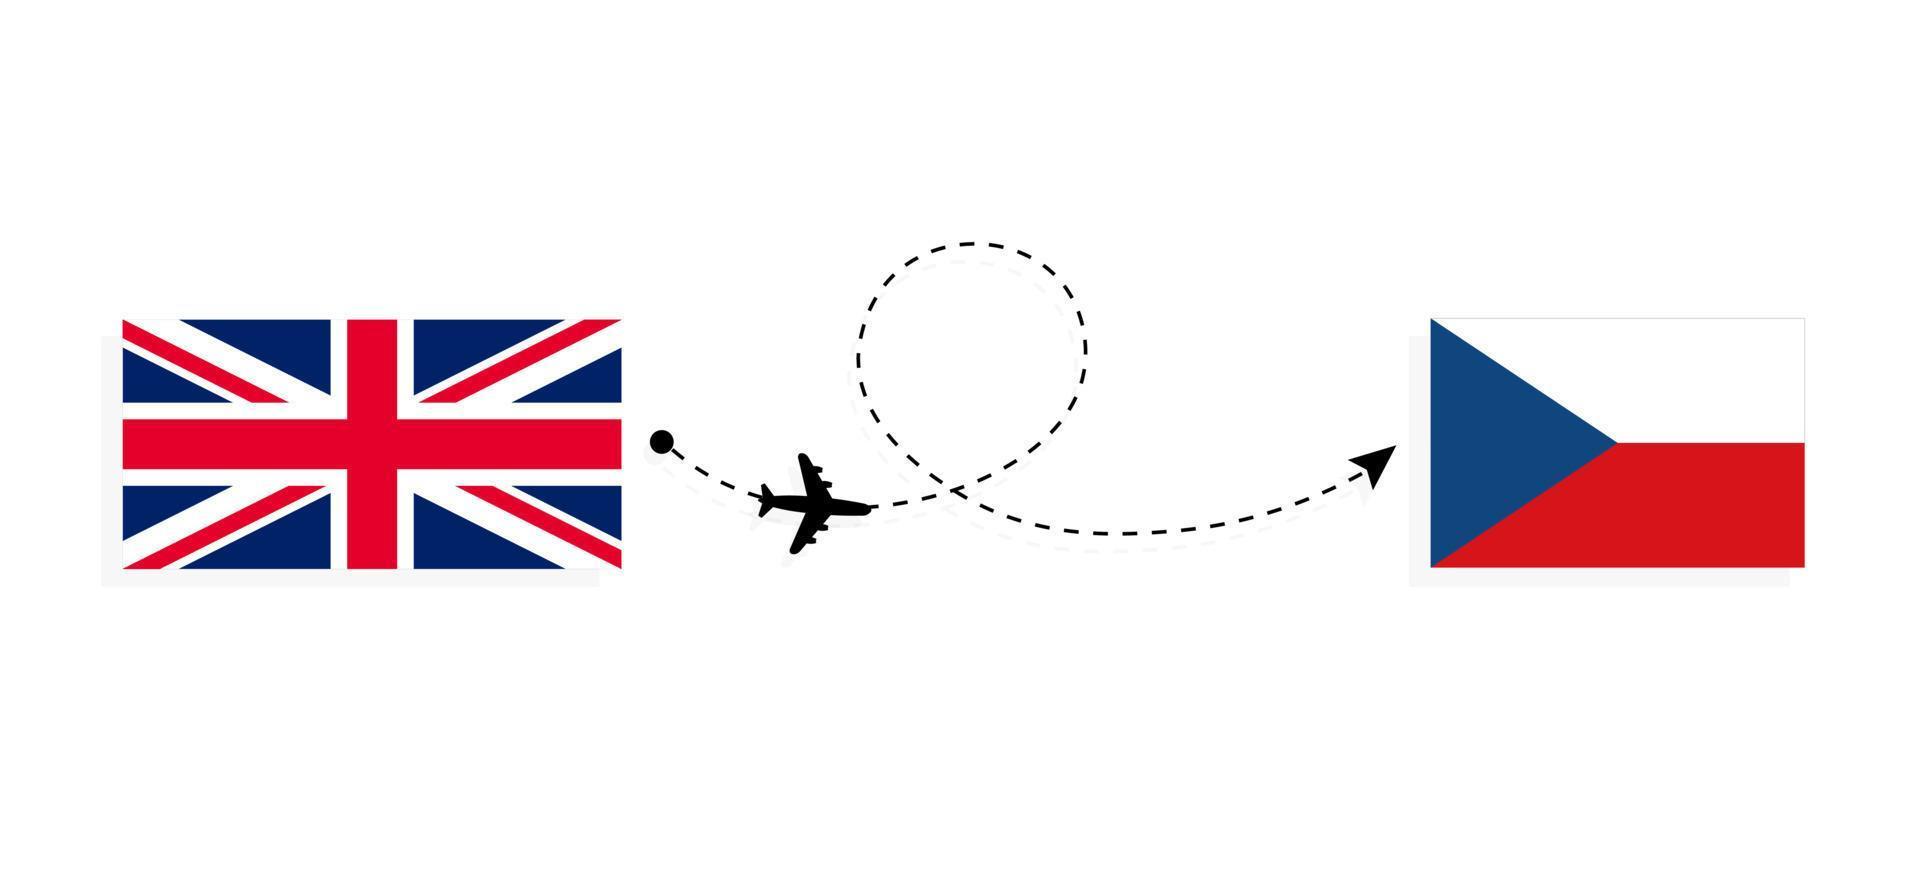 Flight and travel from United Kingdom of Great Britain to Czechia by passenger airplane Travel concept vector